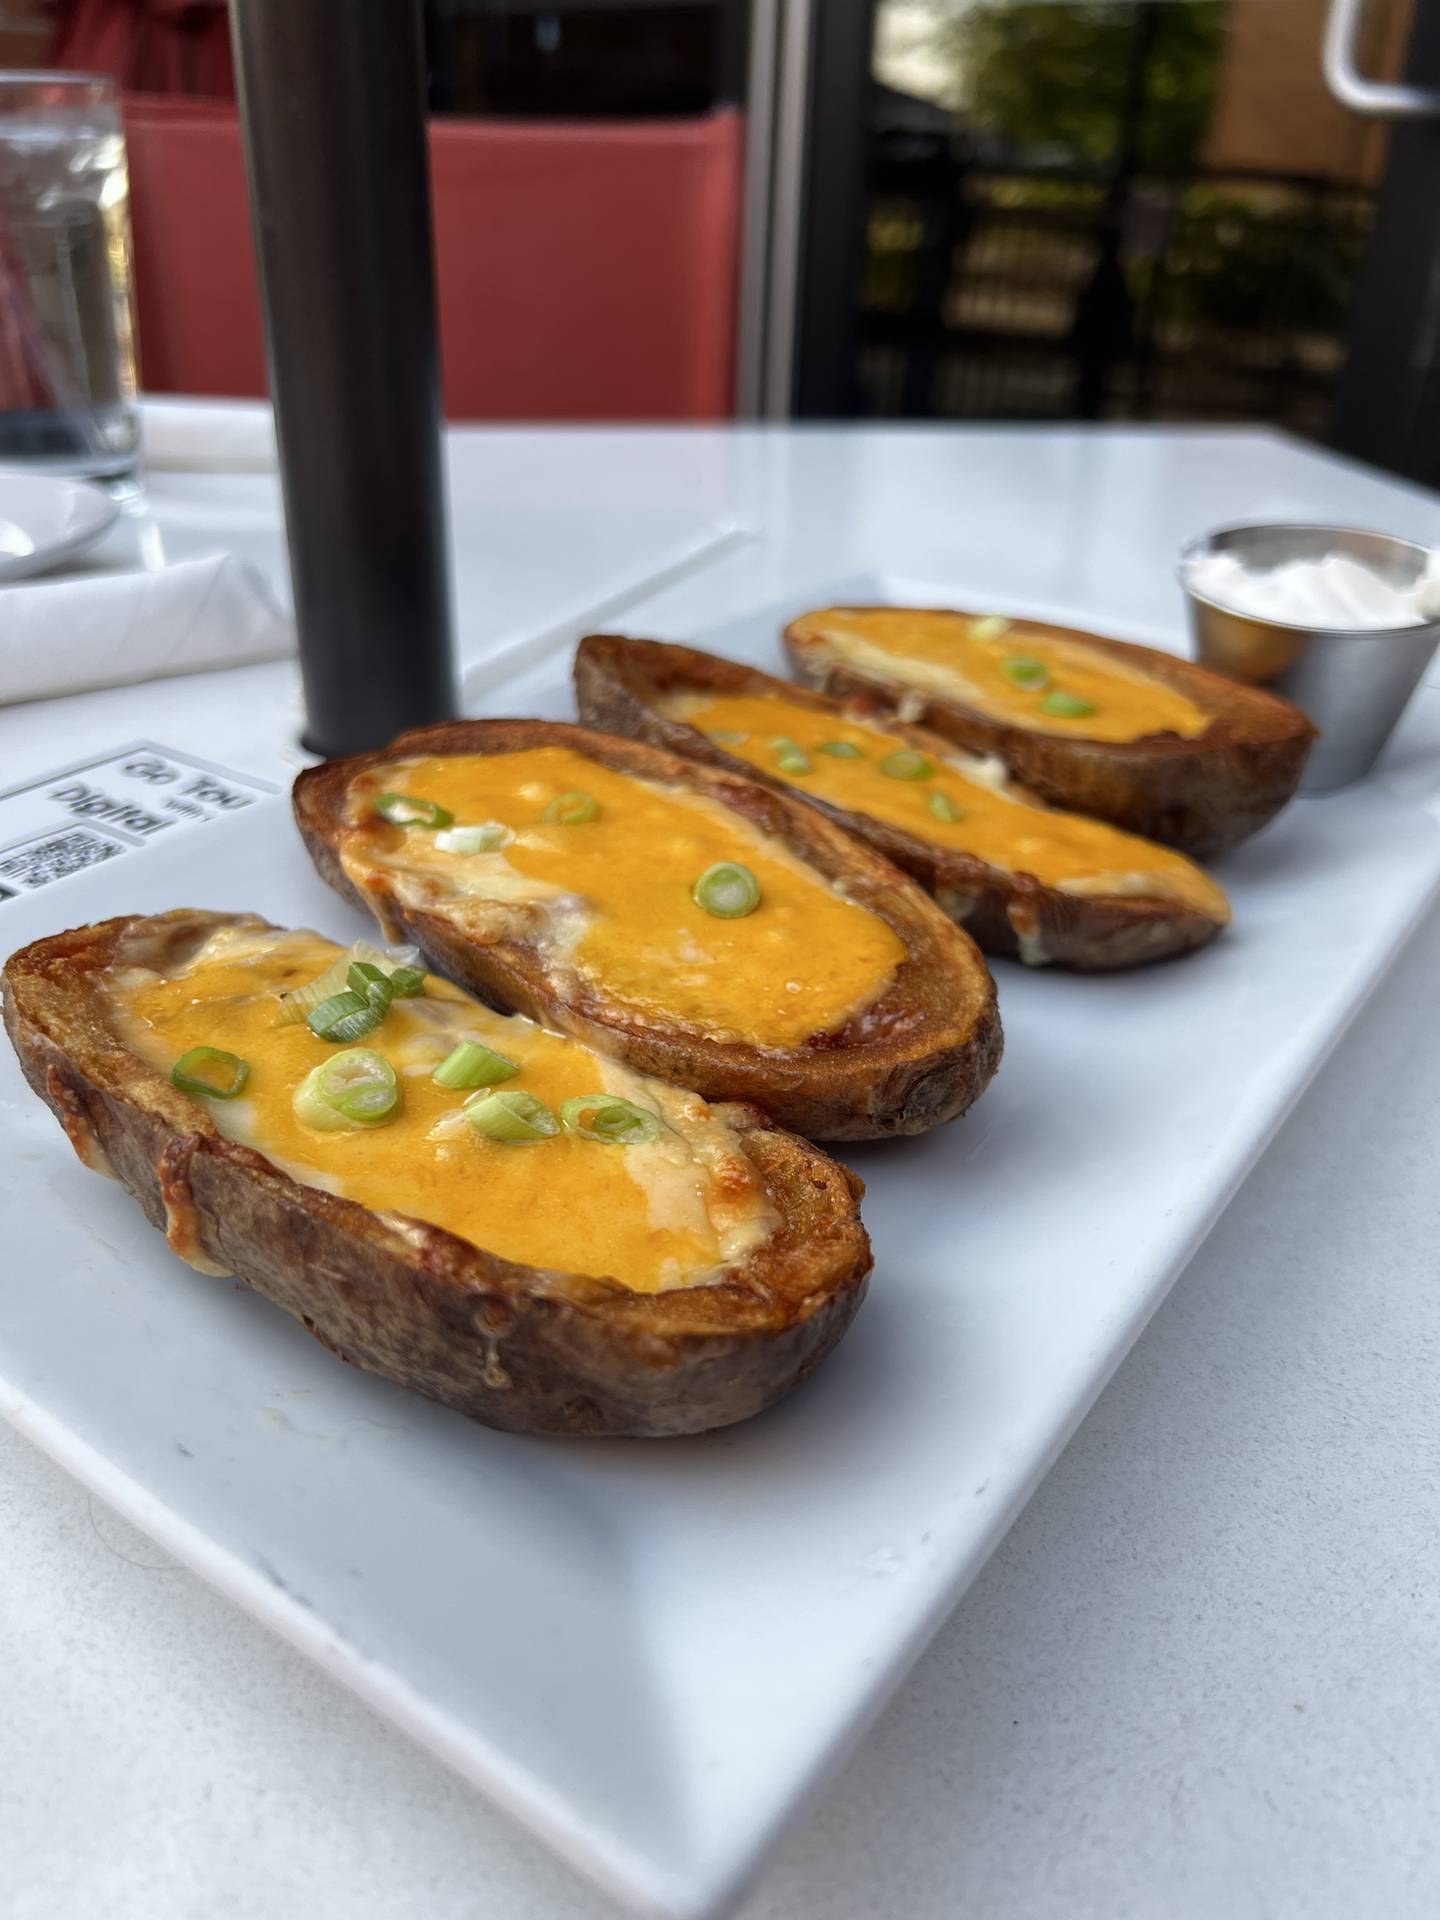 The potato skins appetizer at Village Vintner Winery and Brewery are packed with flavorful cheeses.